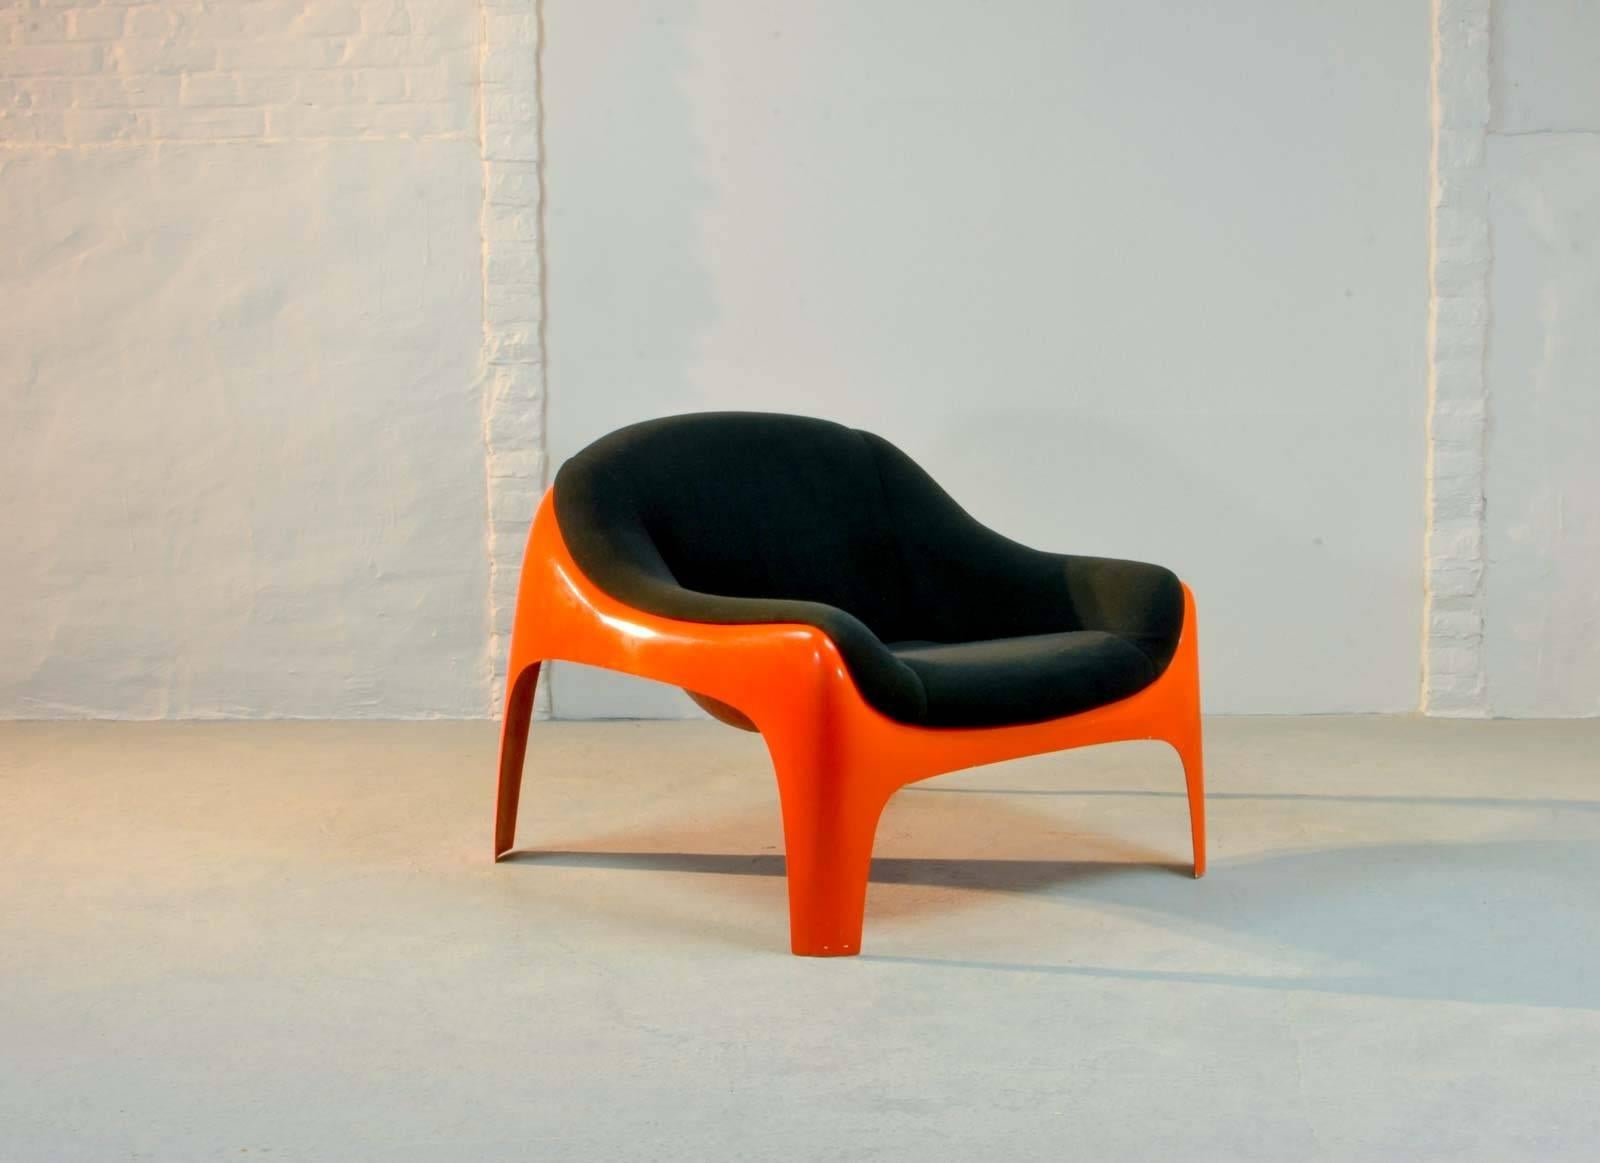 Iconic black and orange colored lounge chair designed by the renowned and multiple honored Italian designer and Artemide co-founder, Sergio Mazza in the 1960s. The chair features a -for the sixties era- revolutionary fiberglass shell with the